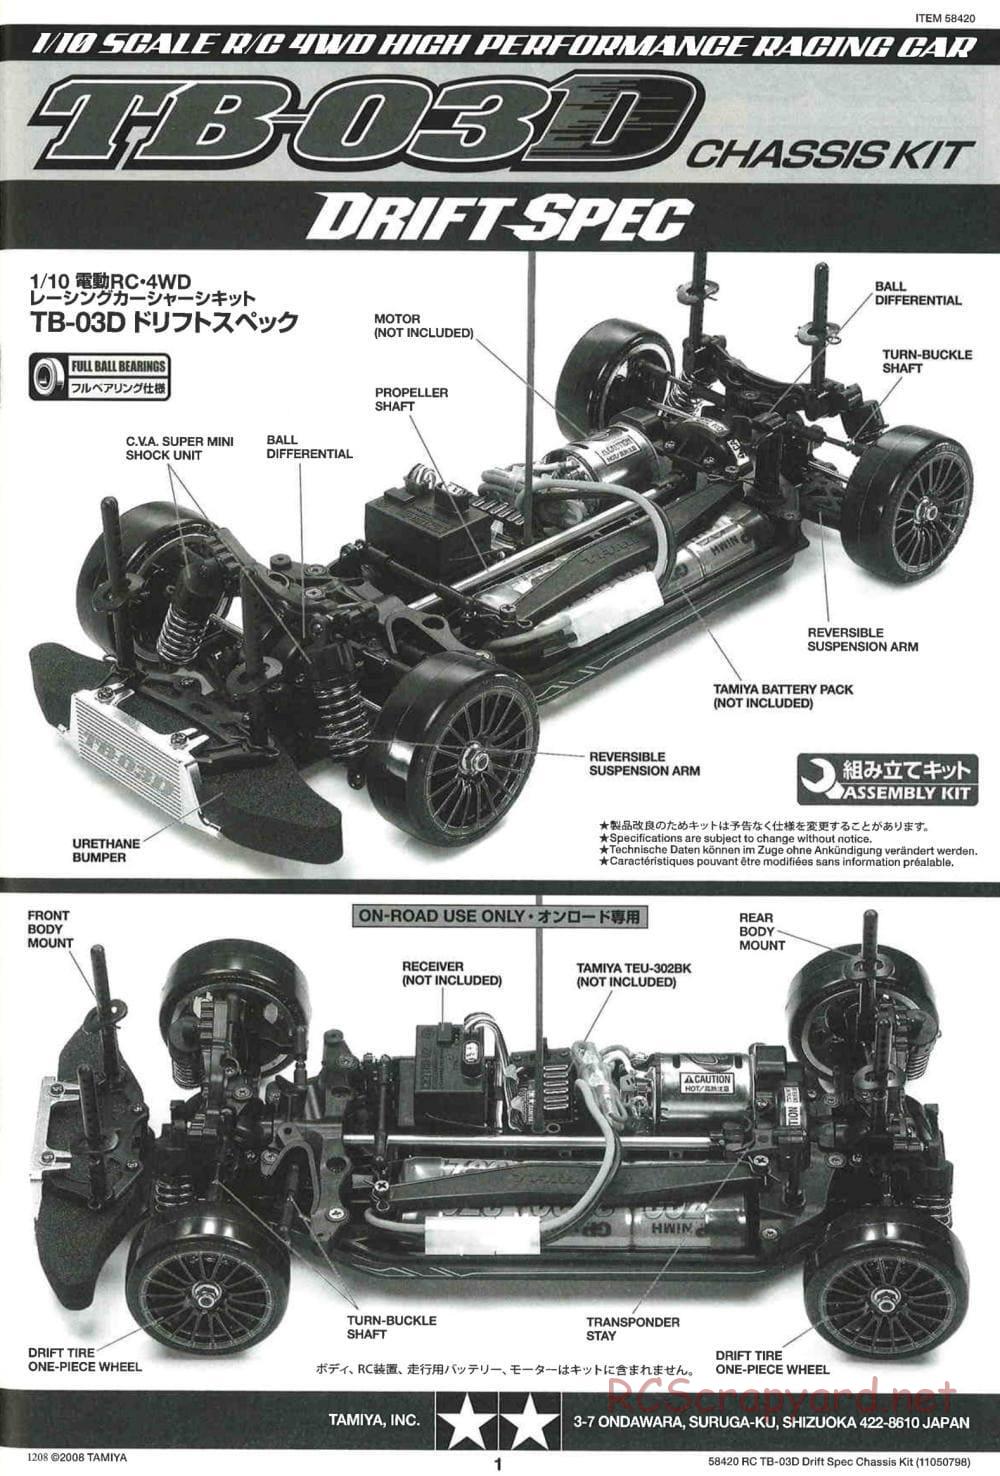 Tamiya - TB-03D HP Drift Spec Chassis - Manual - Page 1